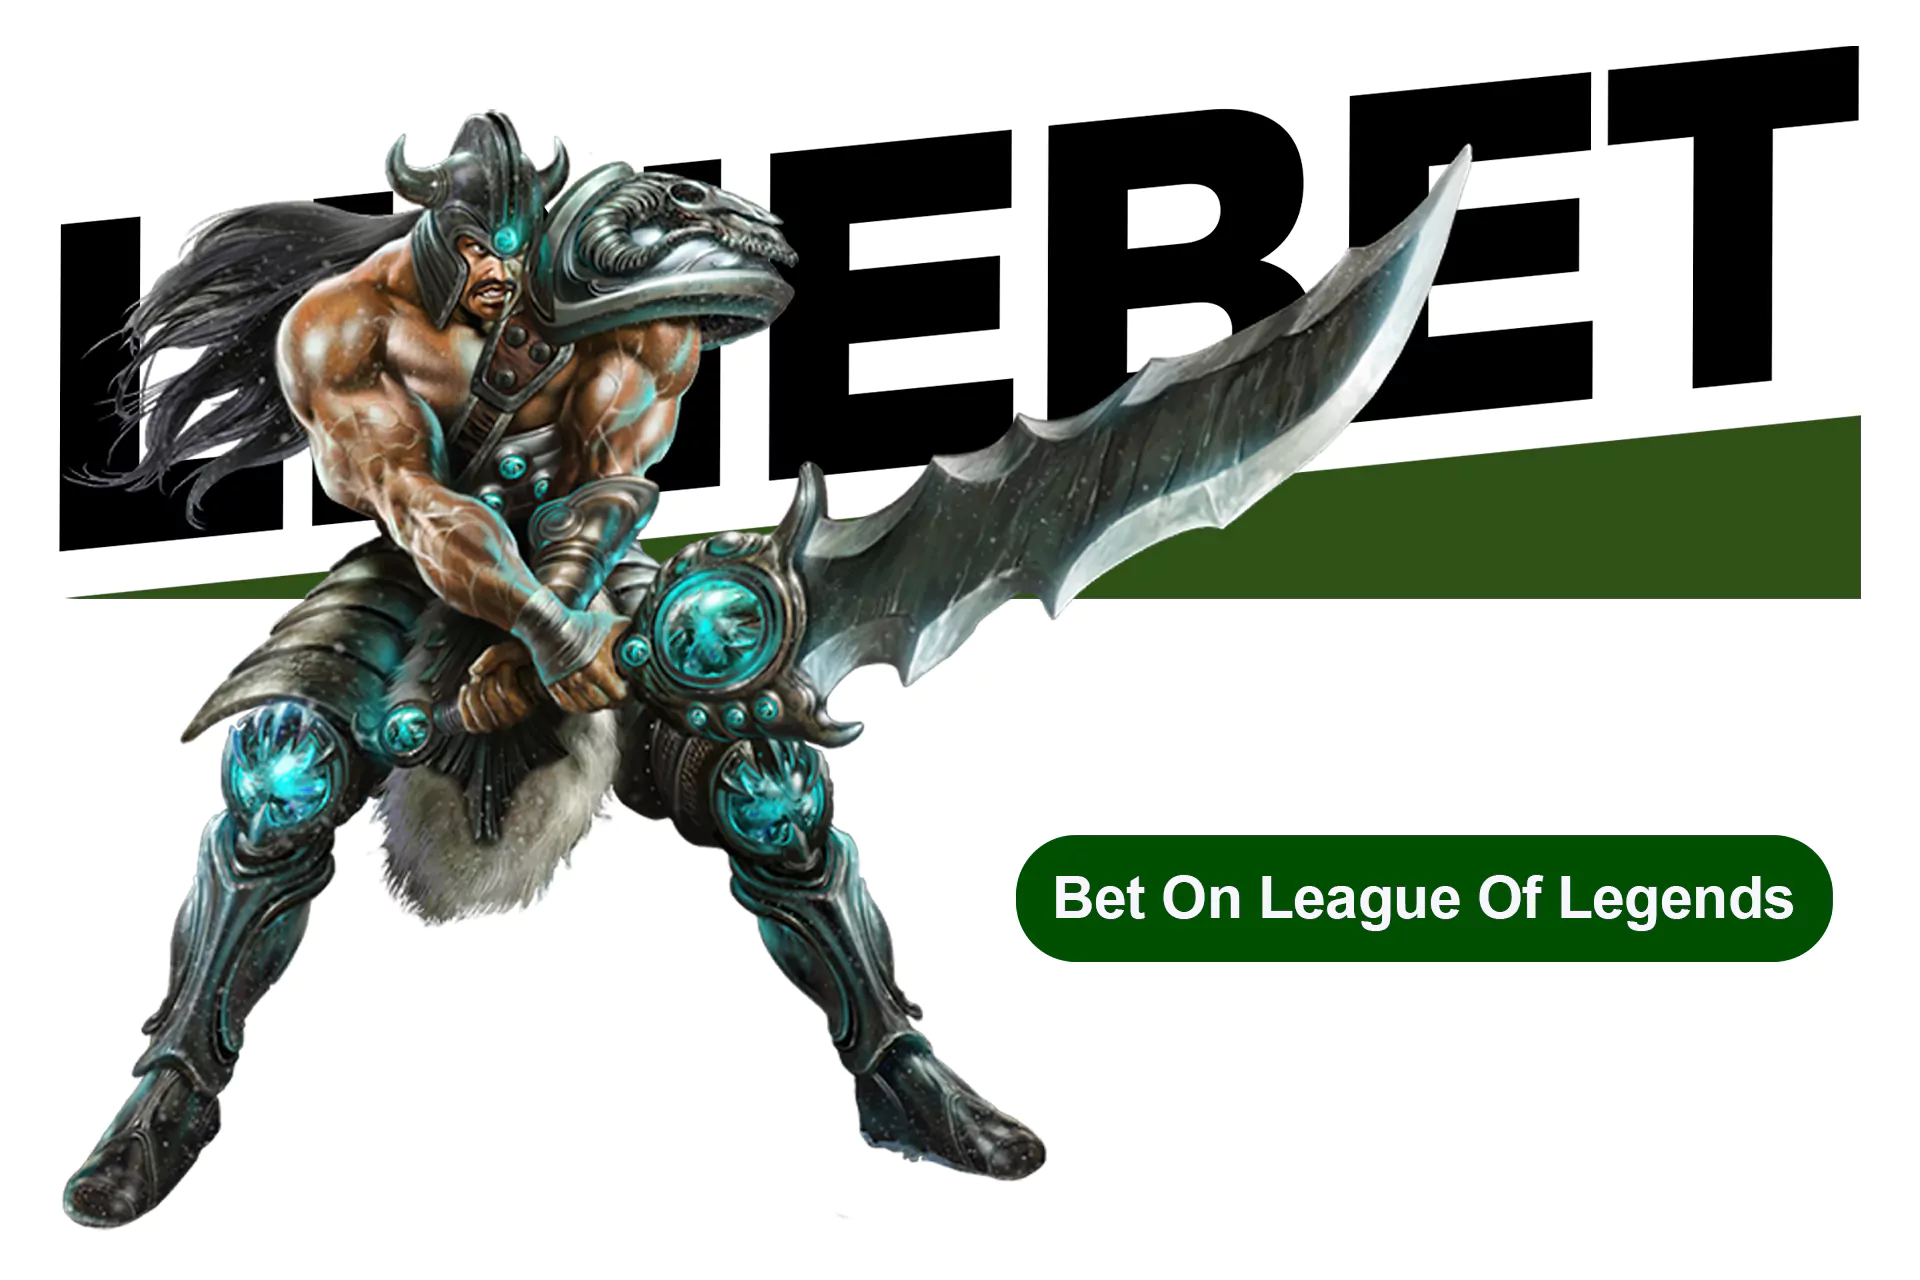 You always can find available League of Legends matches for betting on Linebet.